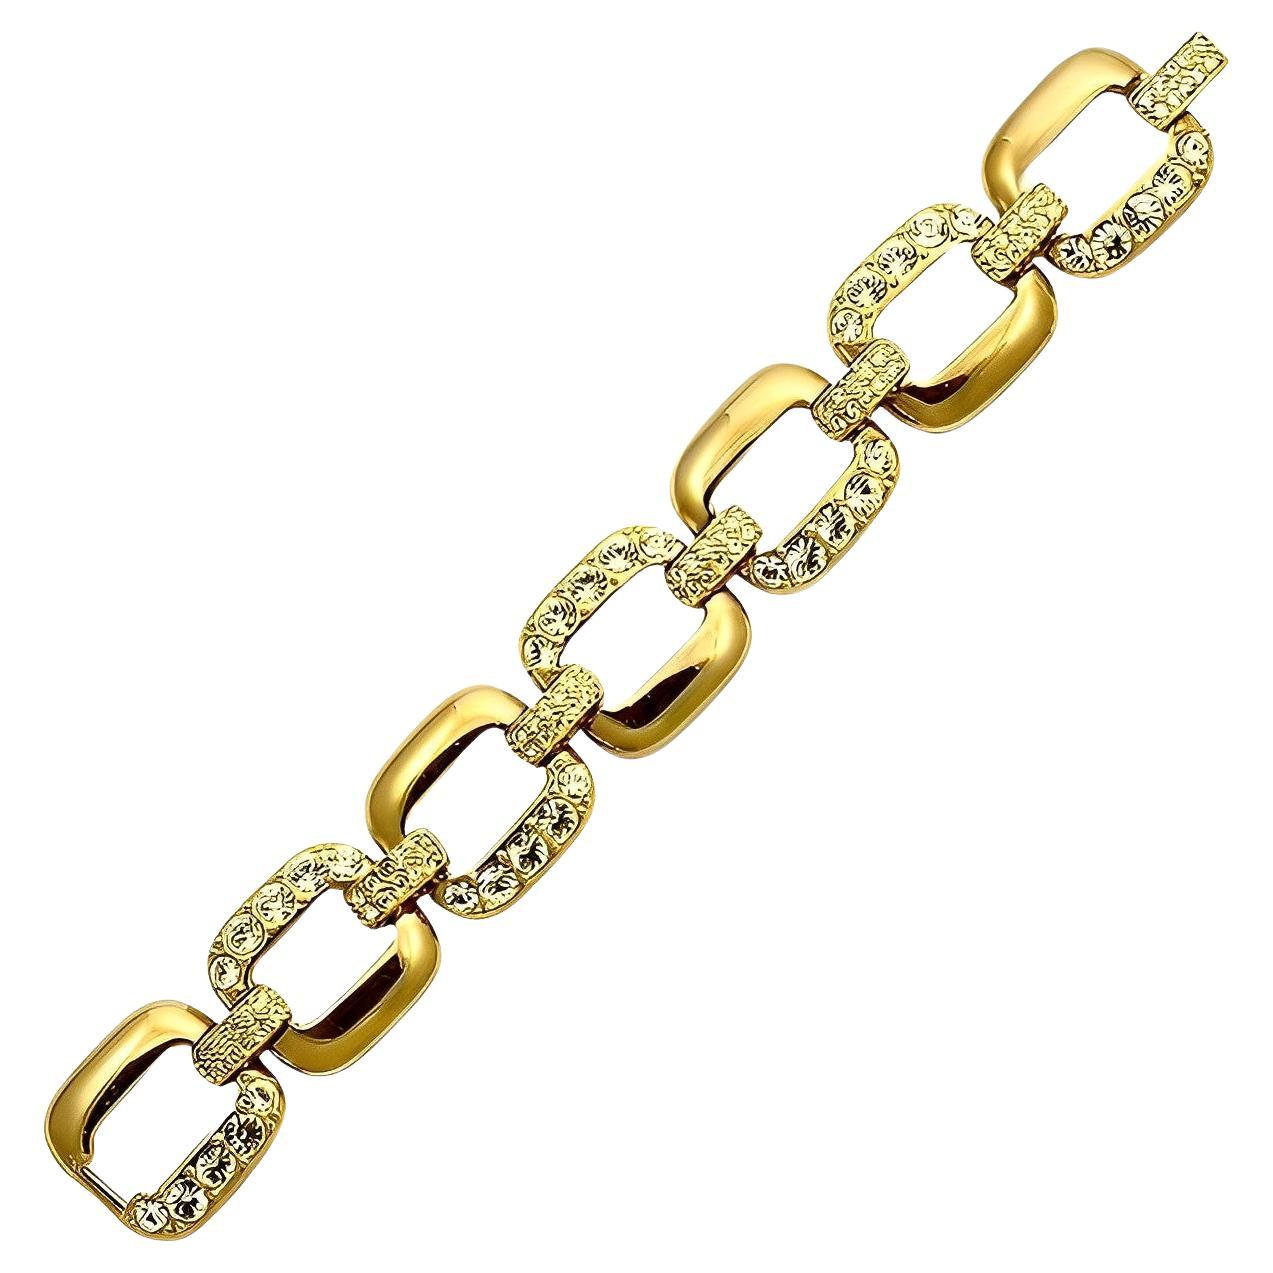 Gold Plated Wide Link Statement Bracelet with Crystals circa 1980s